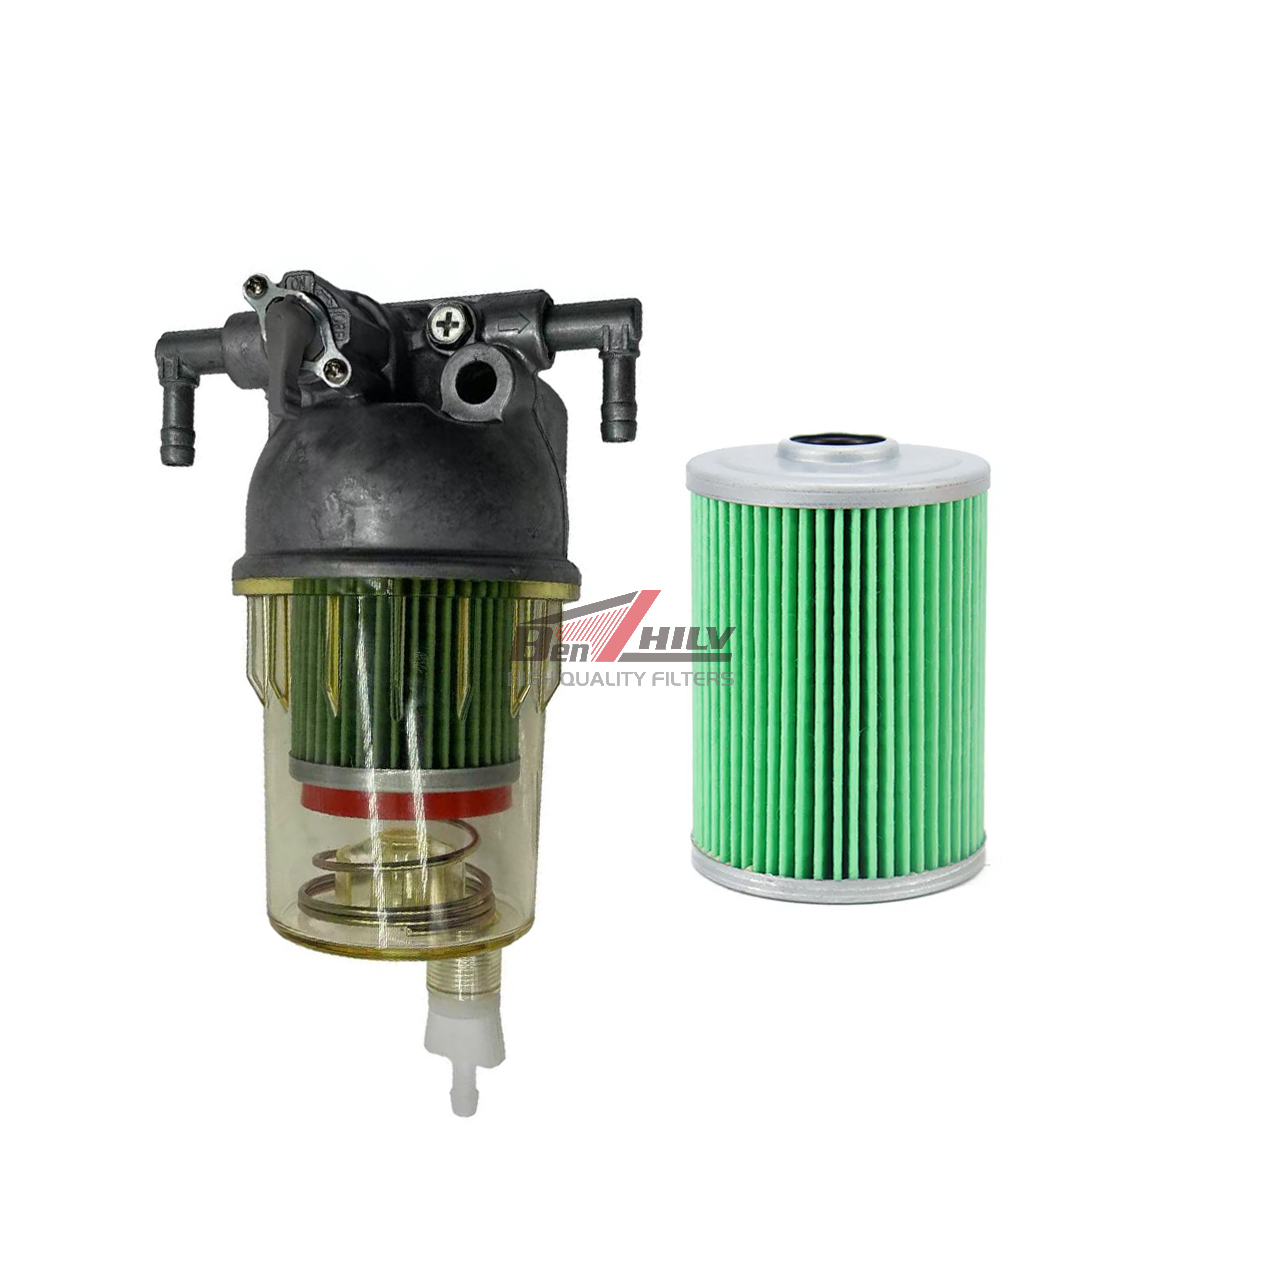 800159455 Diesel Water Separator Assembly for XCMG Crawler Excavator